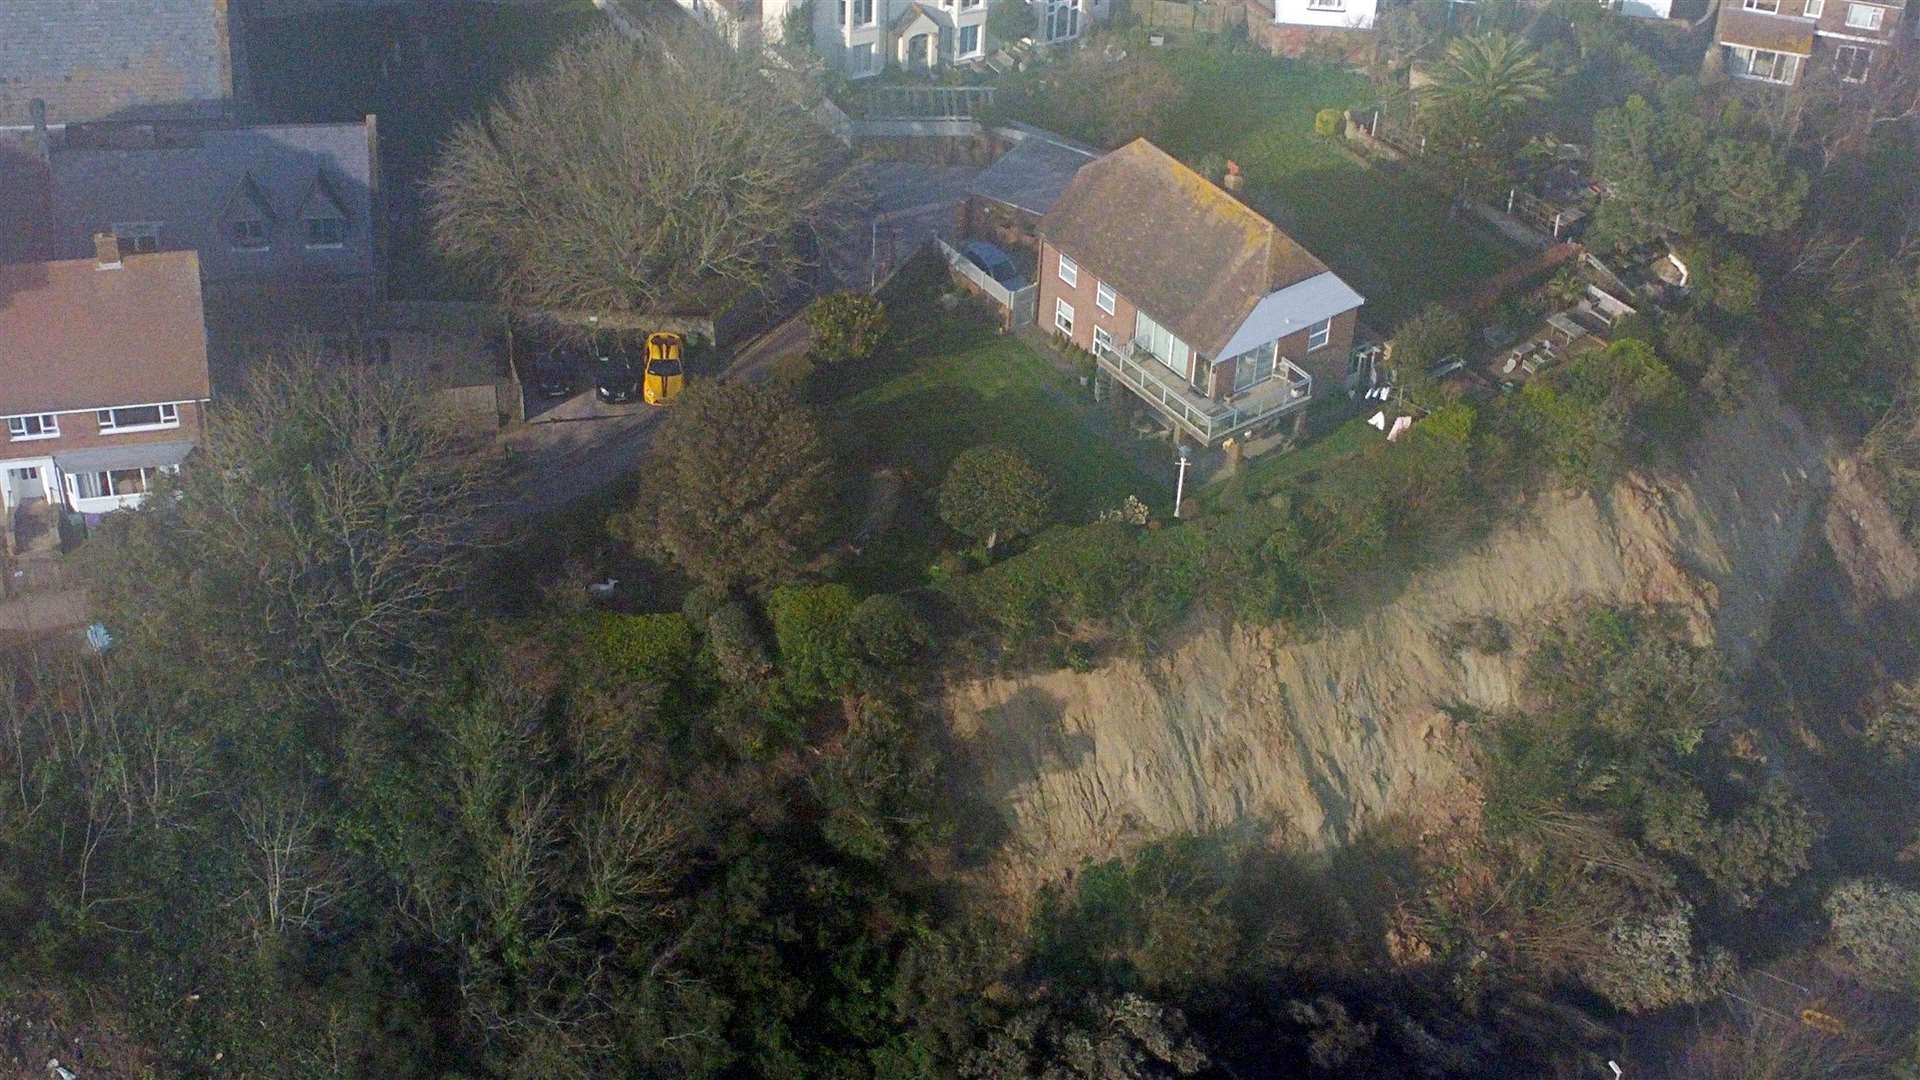 Scene of a landslide on Remembrance Road, Folkestone.Picture: Barry Goodwin